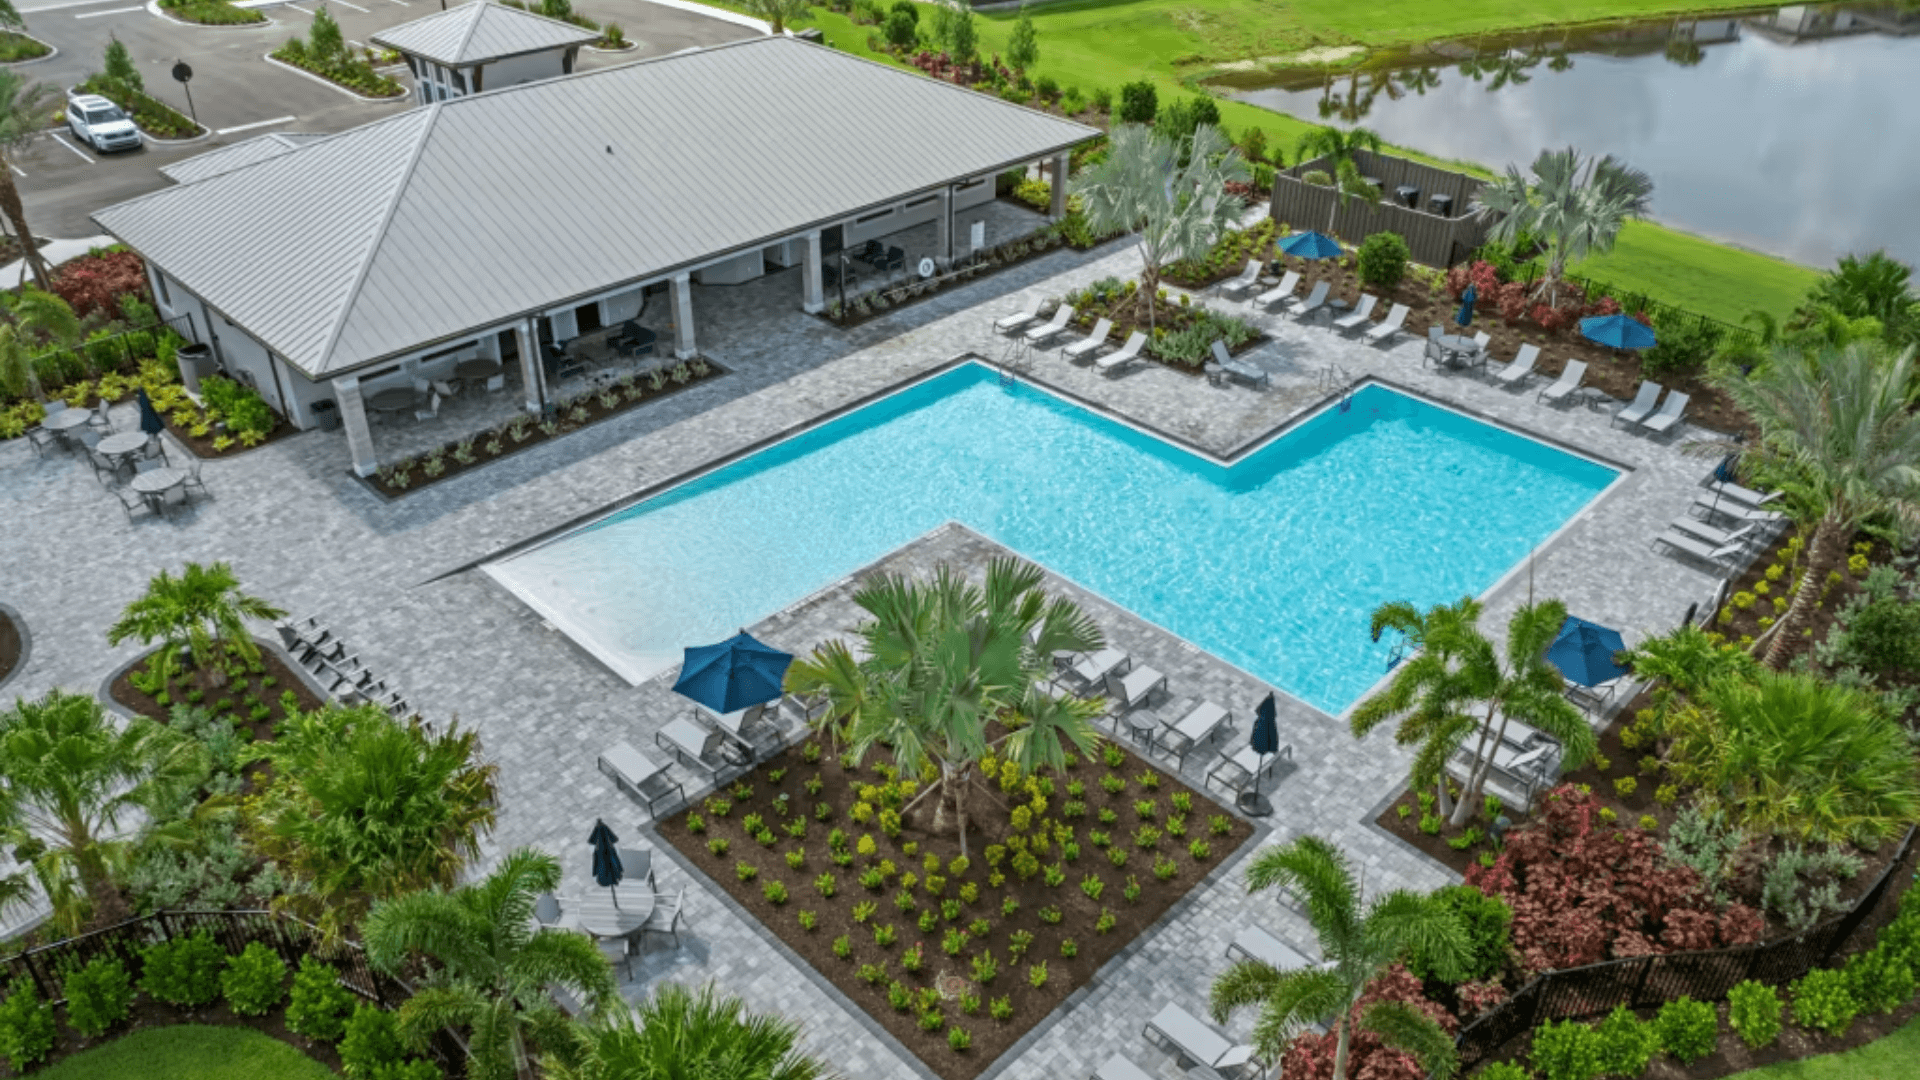 Sapphire Point Lakewood Ranch